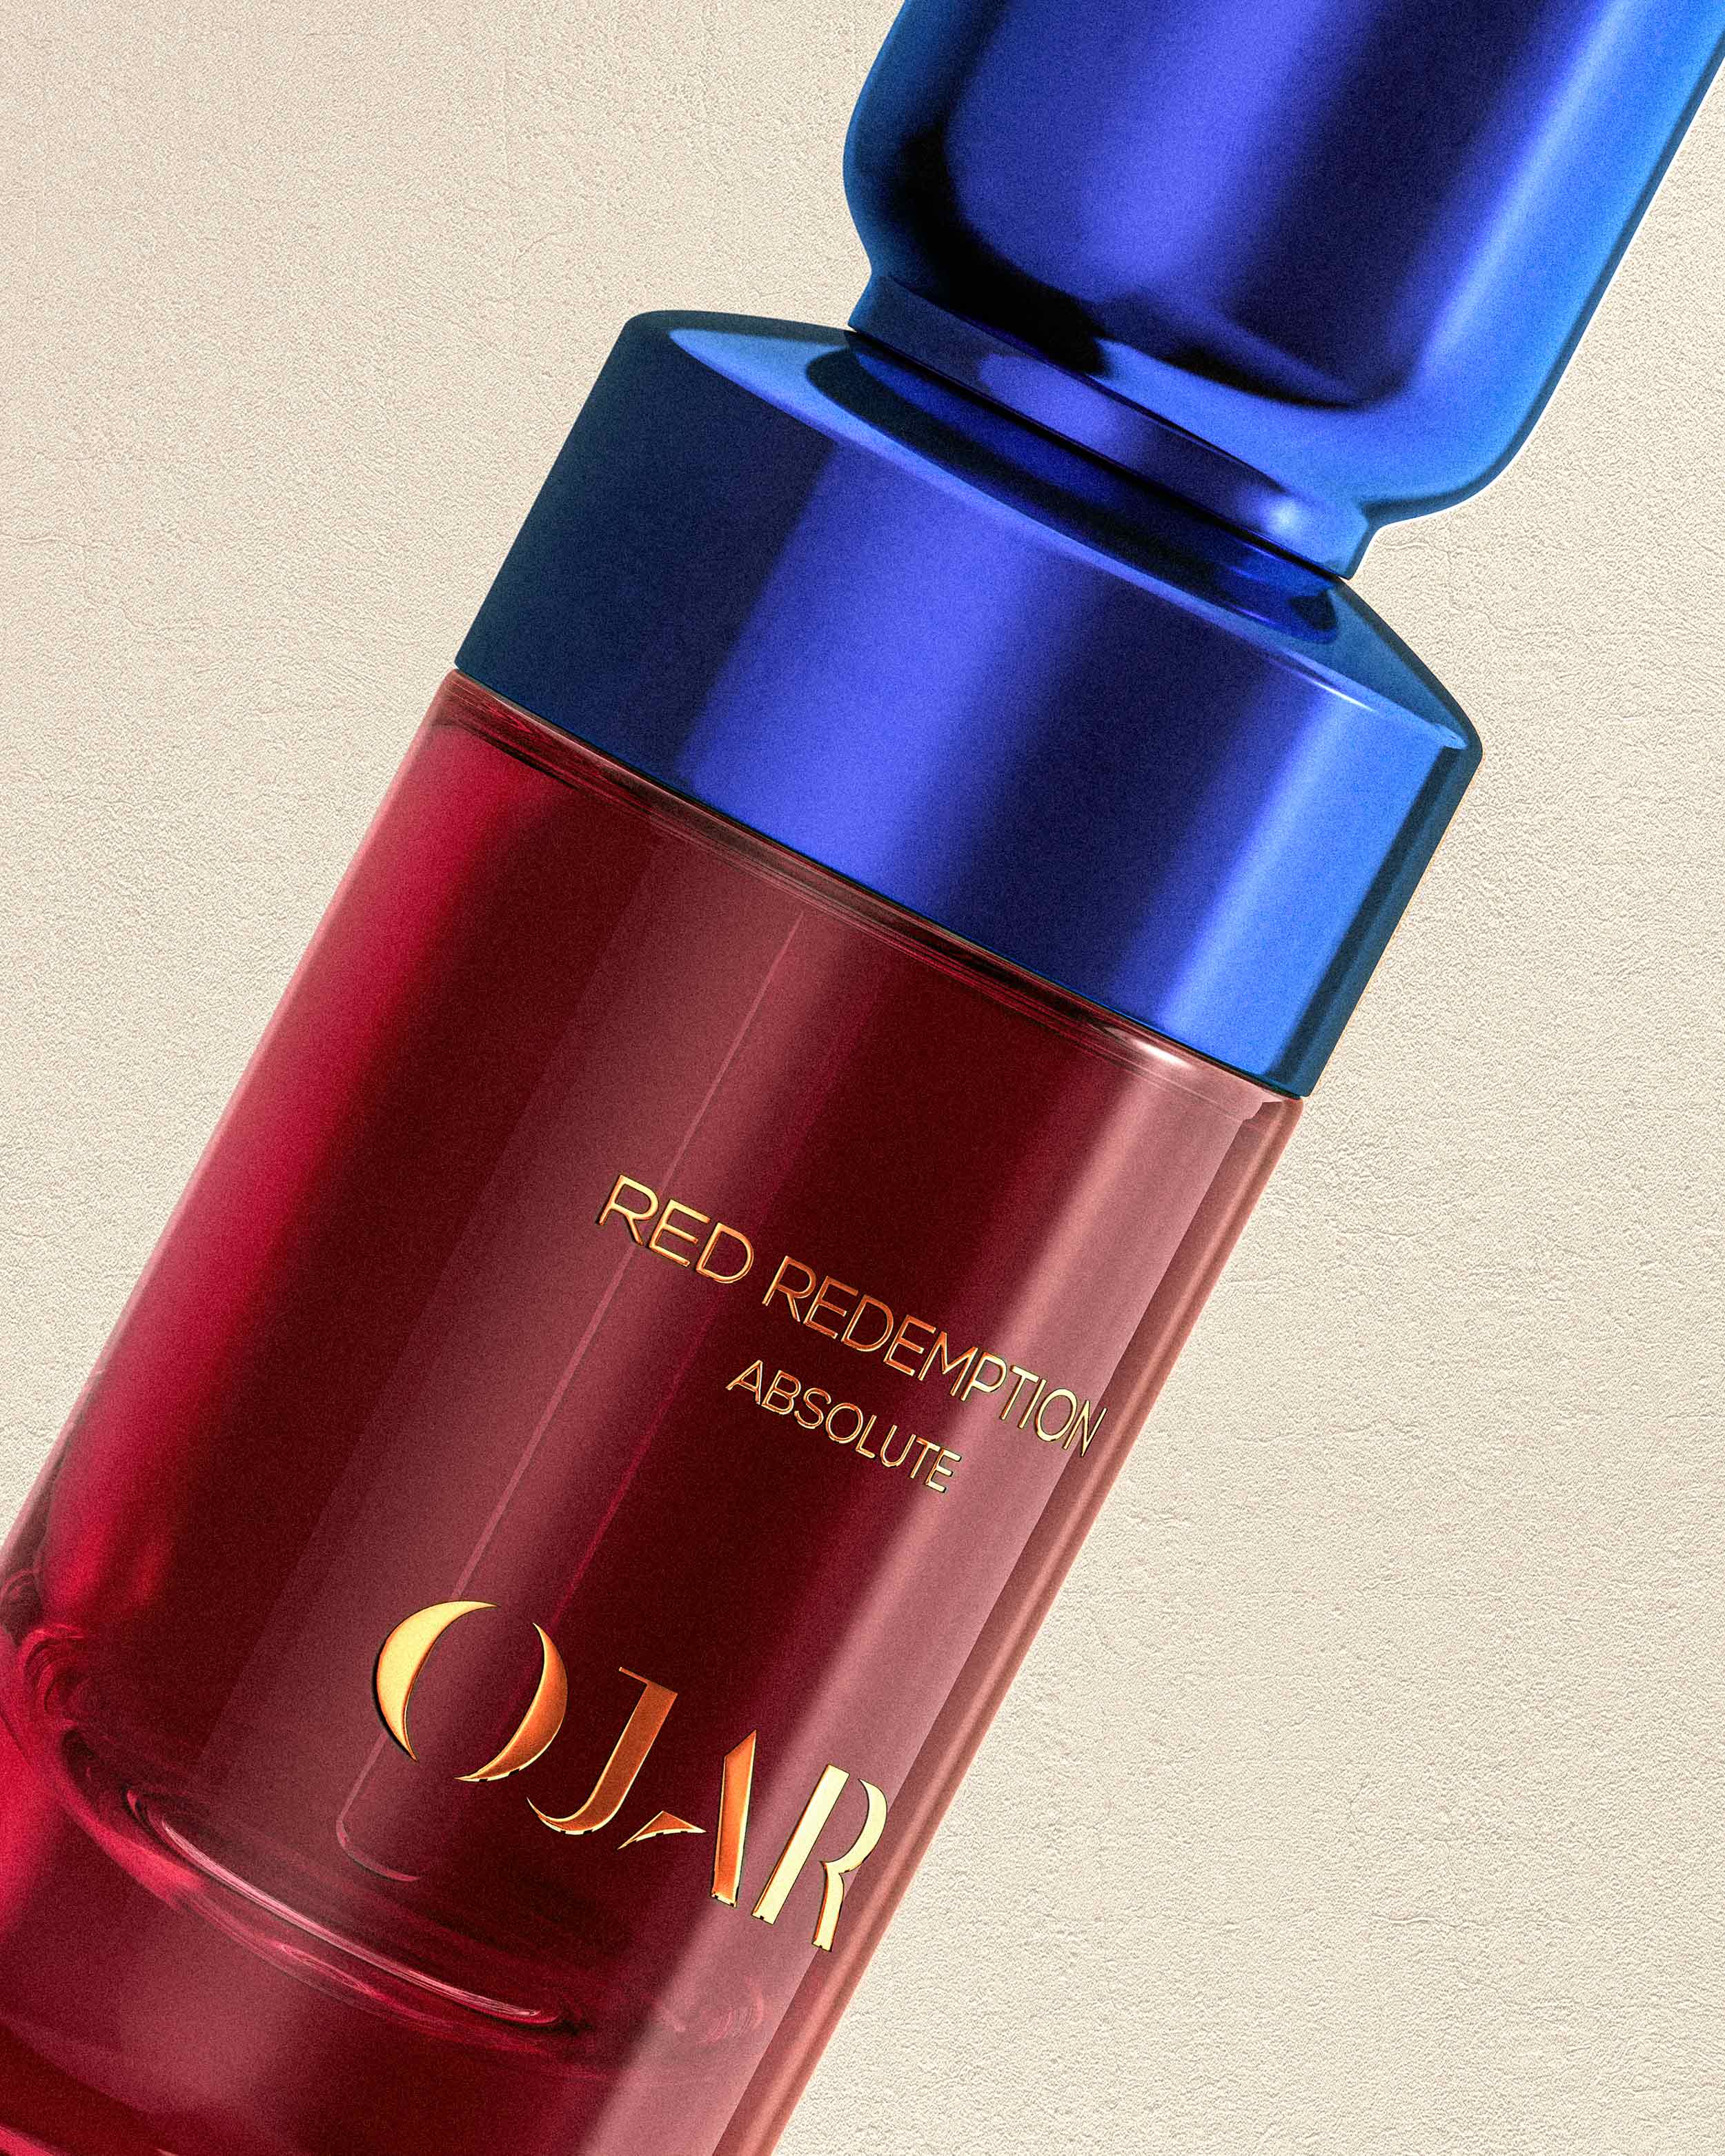 OJAR Absolute Red Redemption Perfume Close Up